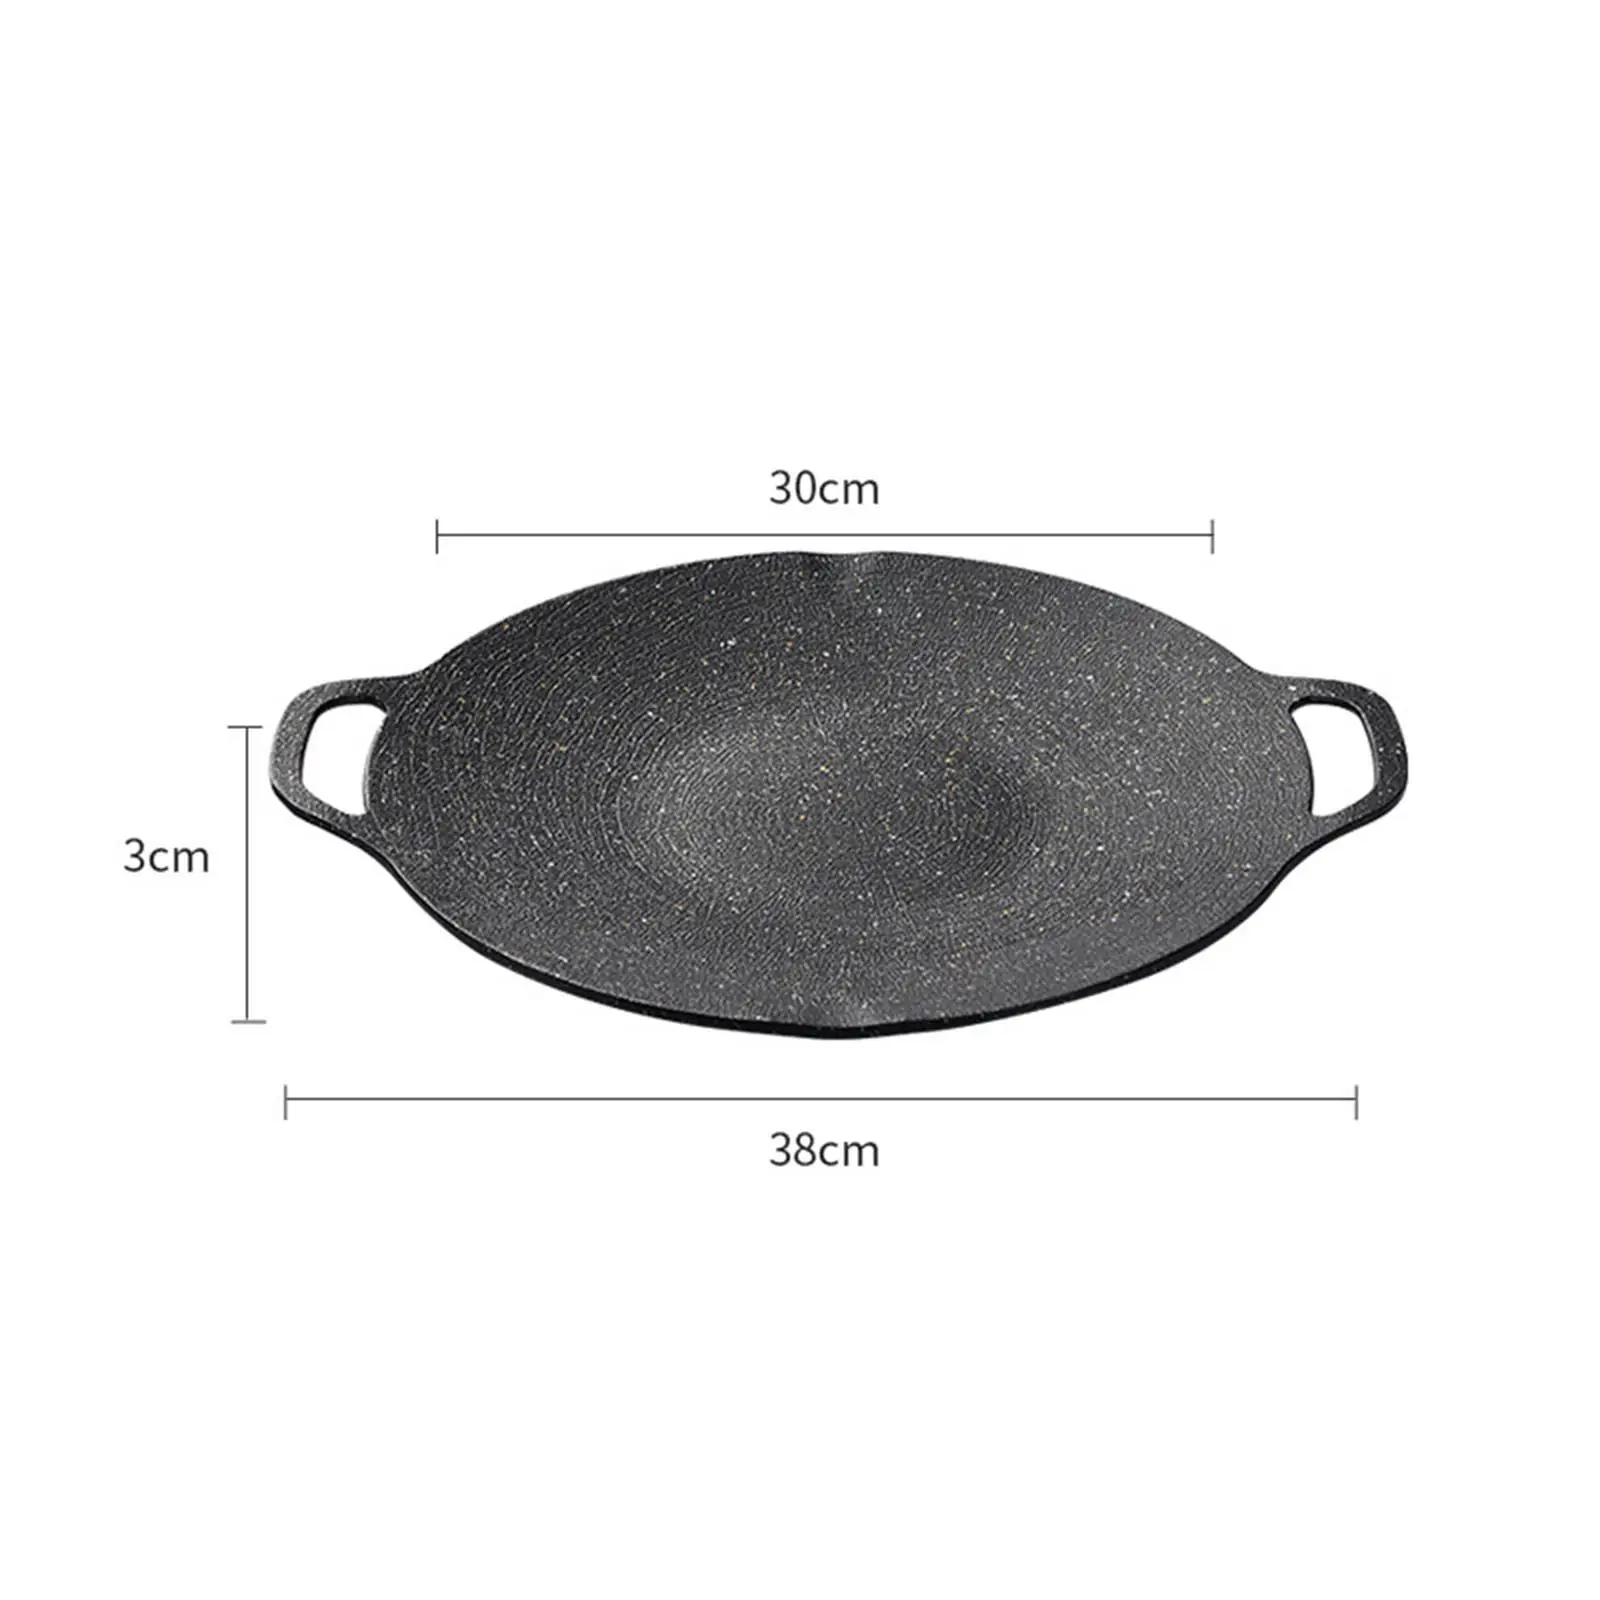 Korean Bbq Pan for Camping and Outdoor Cookware with Handles Griddle Pan